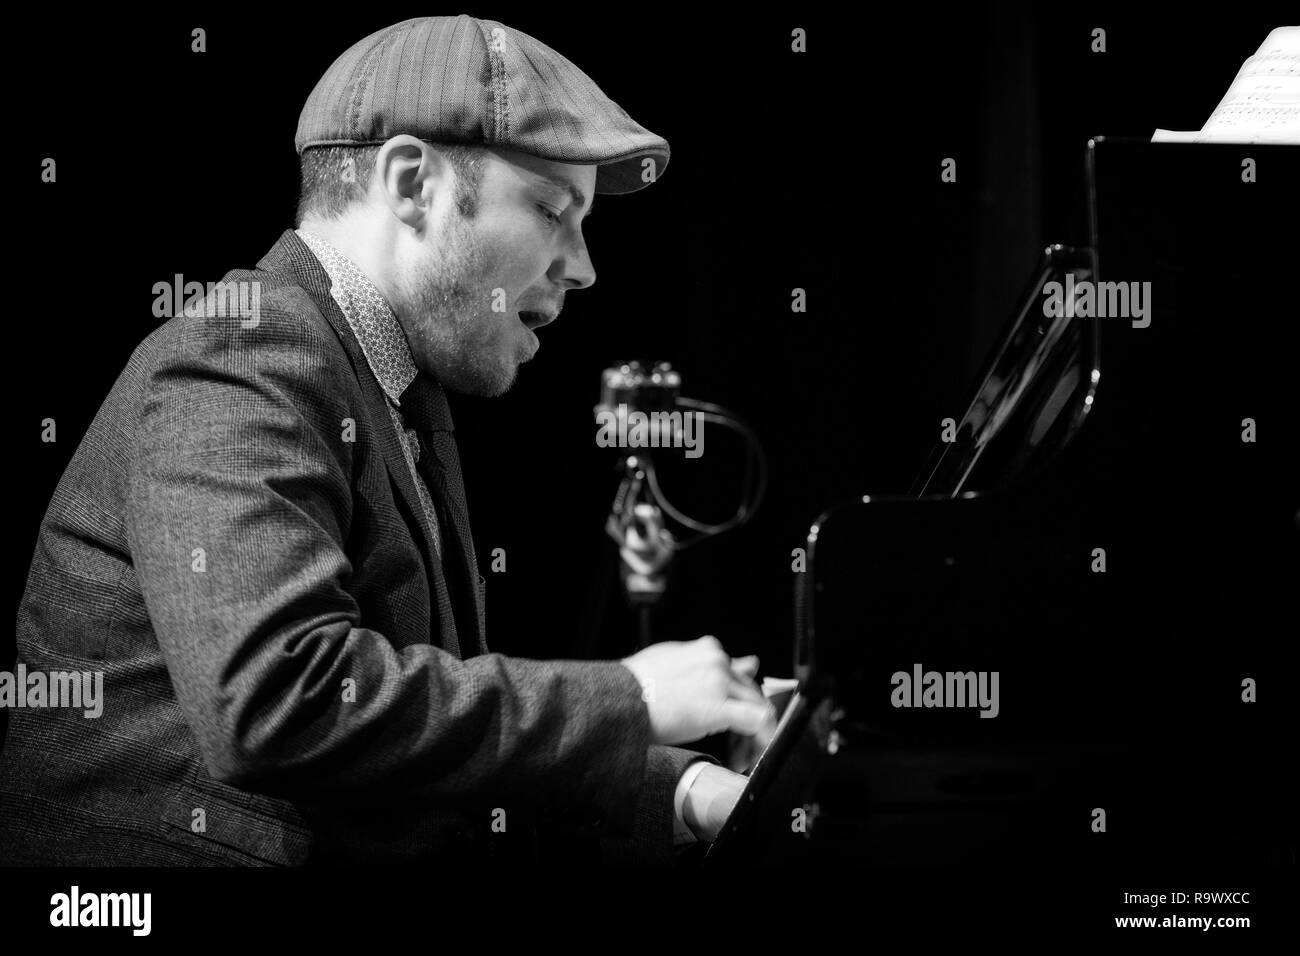 James Pearson plays piano with The Polly Gibbons Quartet, Scarborough Jazz Festival 2017 Stock Photo